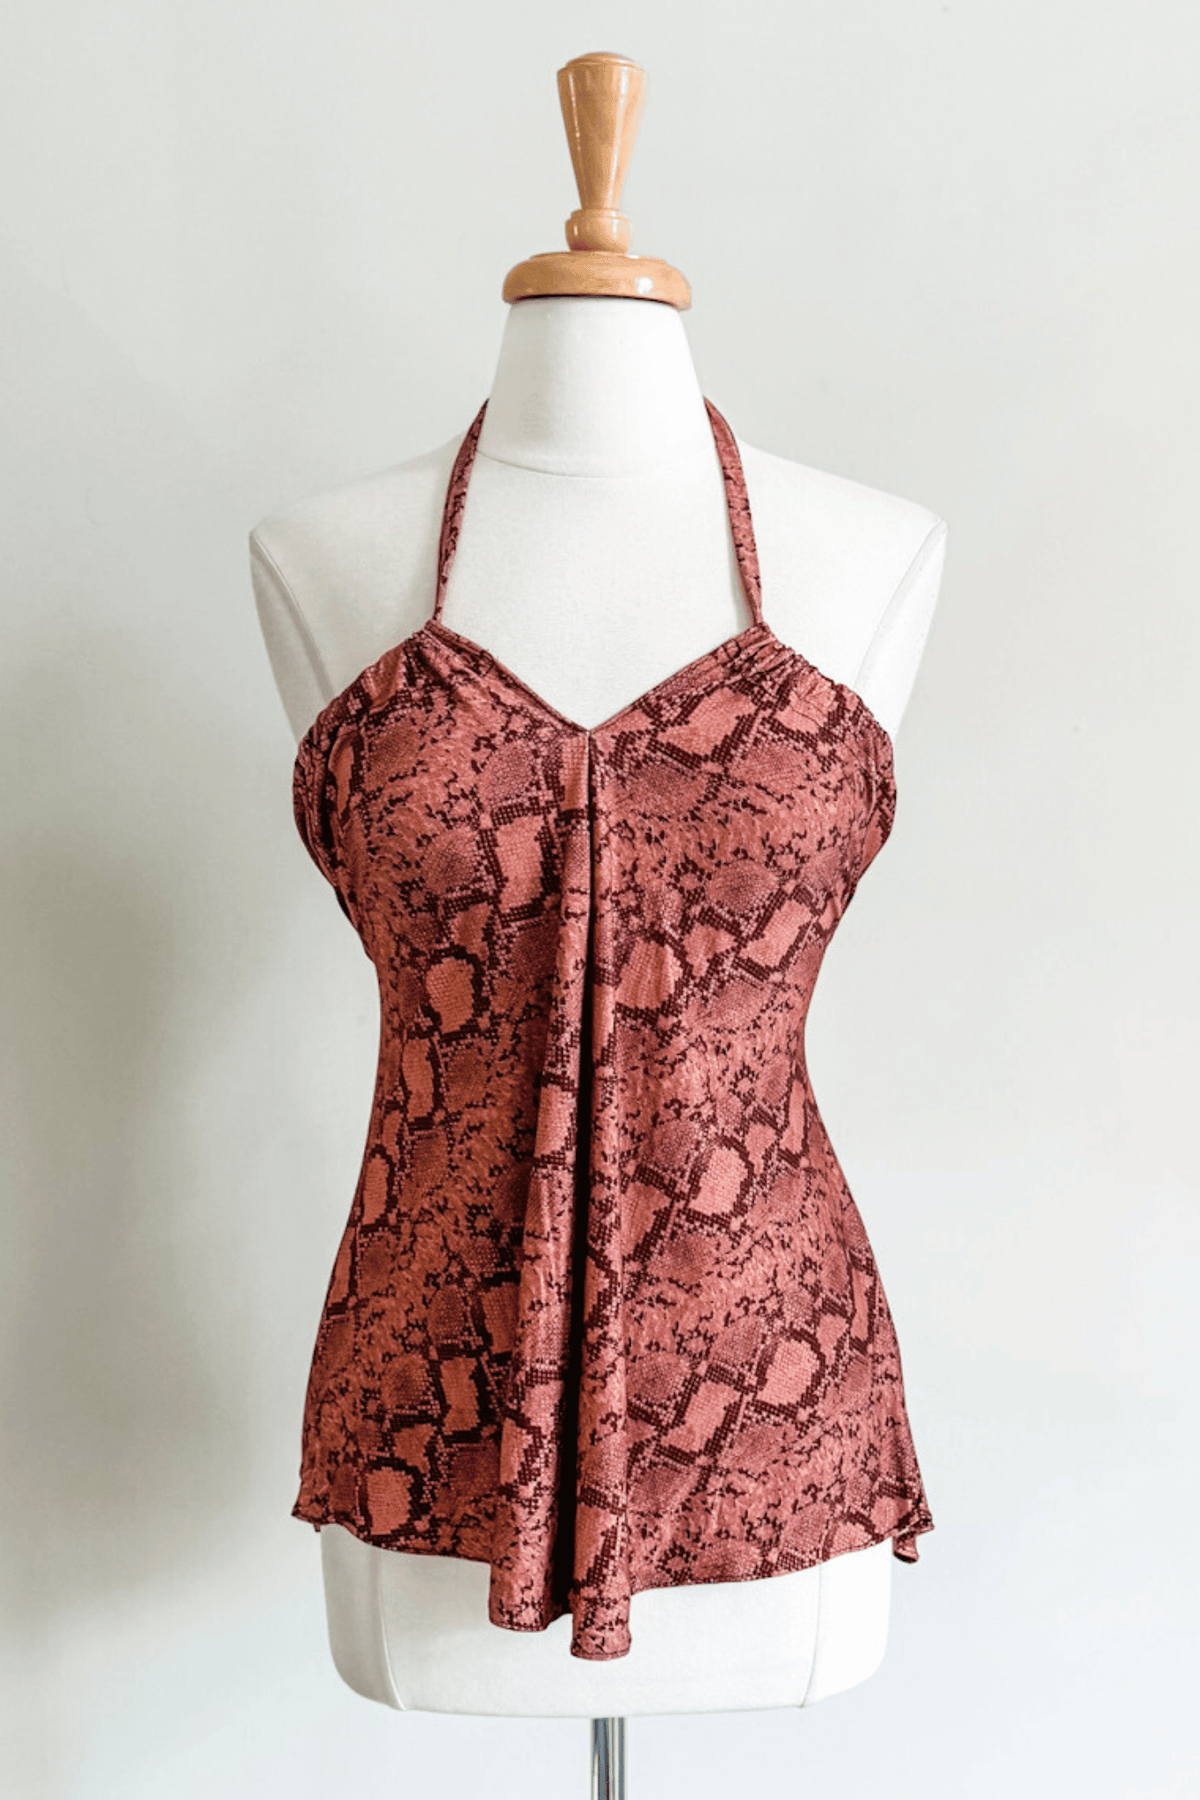 Evermore Top in Clay Snake EcoVero print